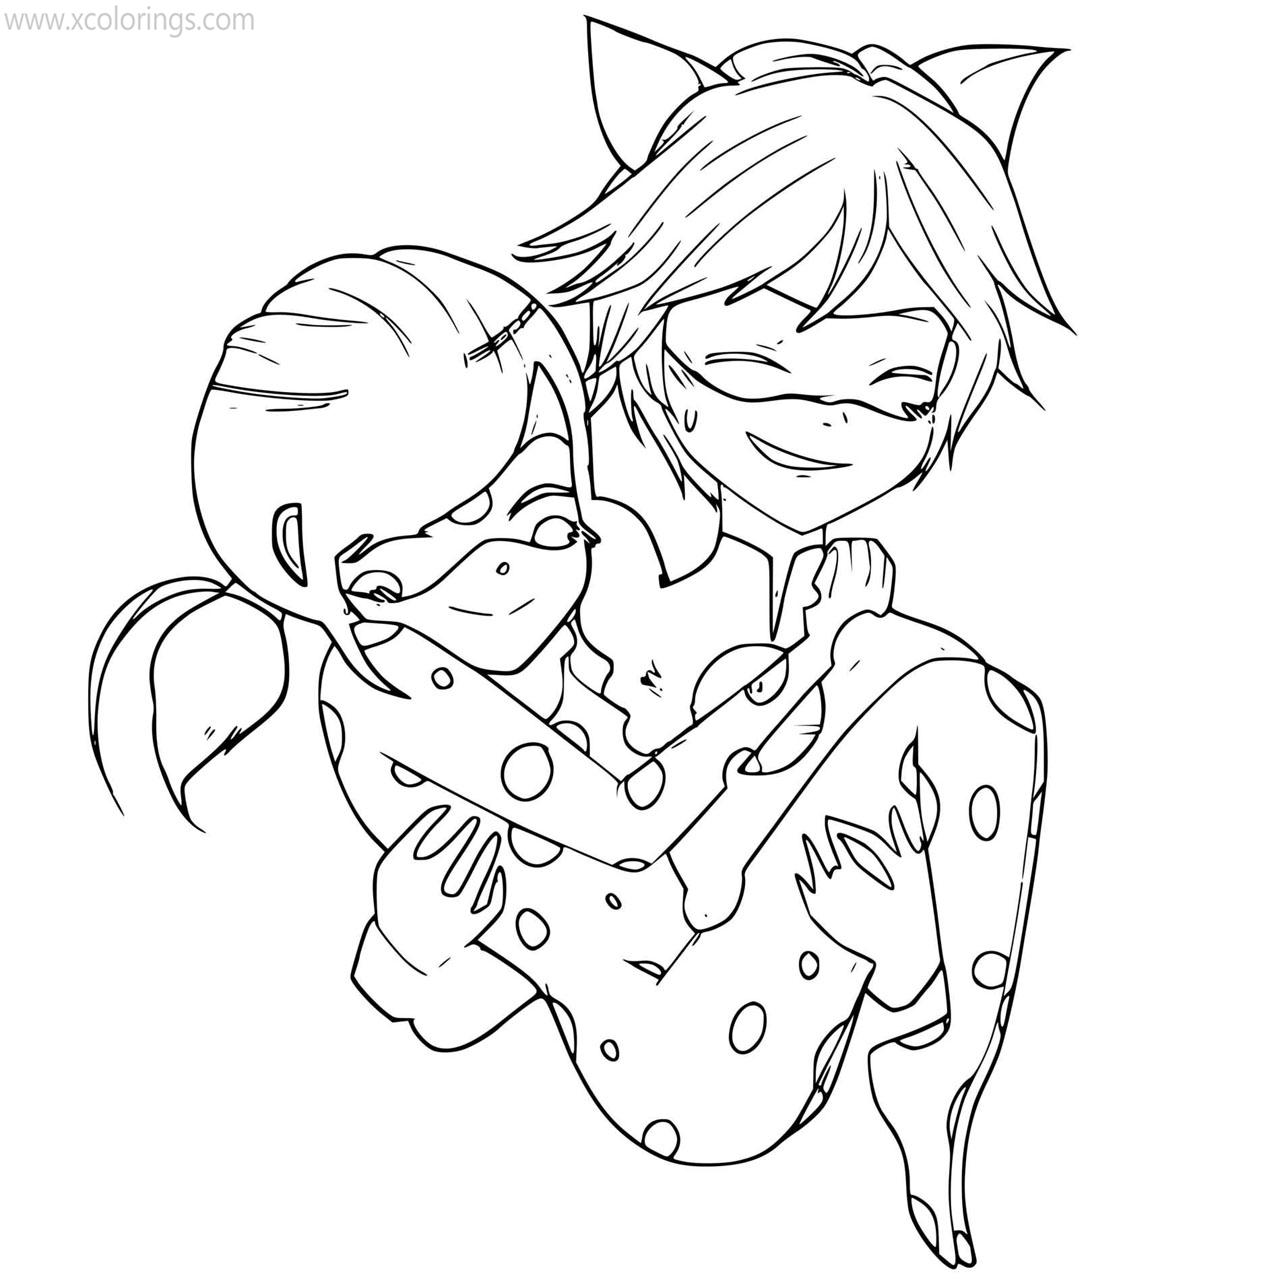 Happy Miraculous Ladybug Coloring Pages - XColorings.com